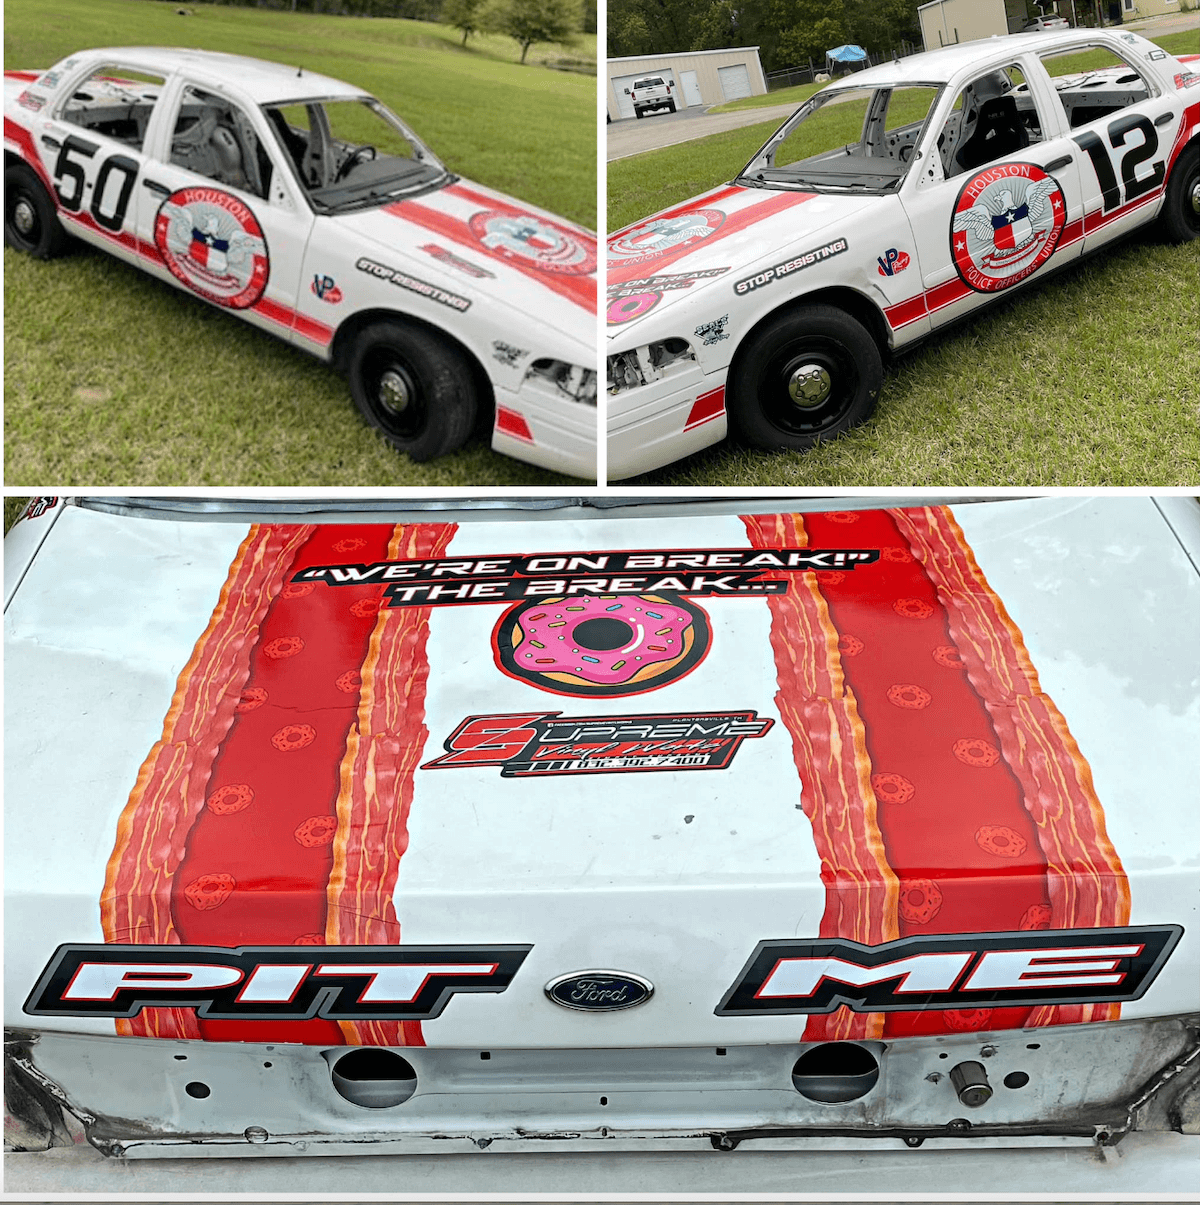 The crown vics turned dirt racers were built by cops to race street racers